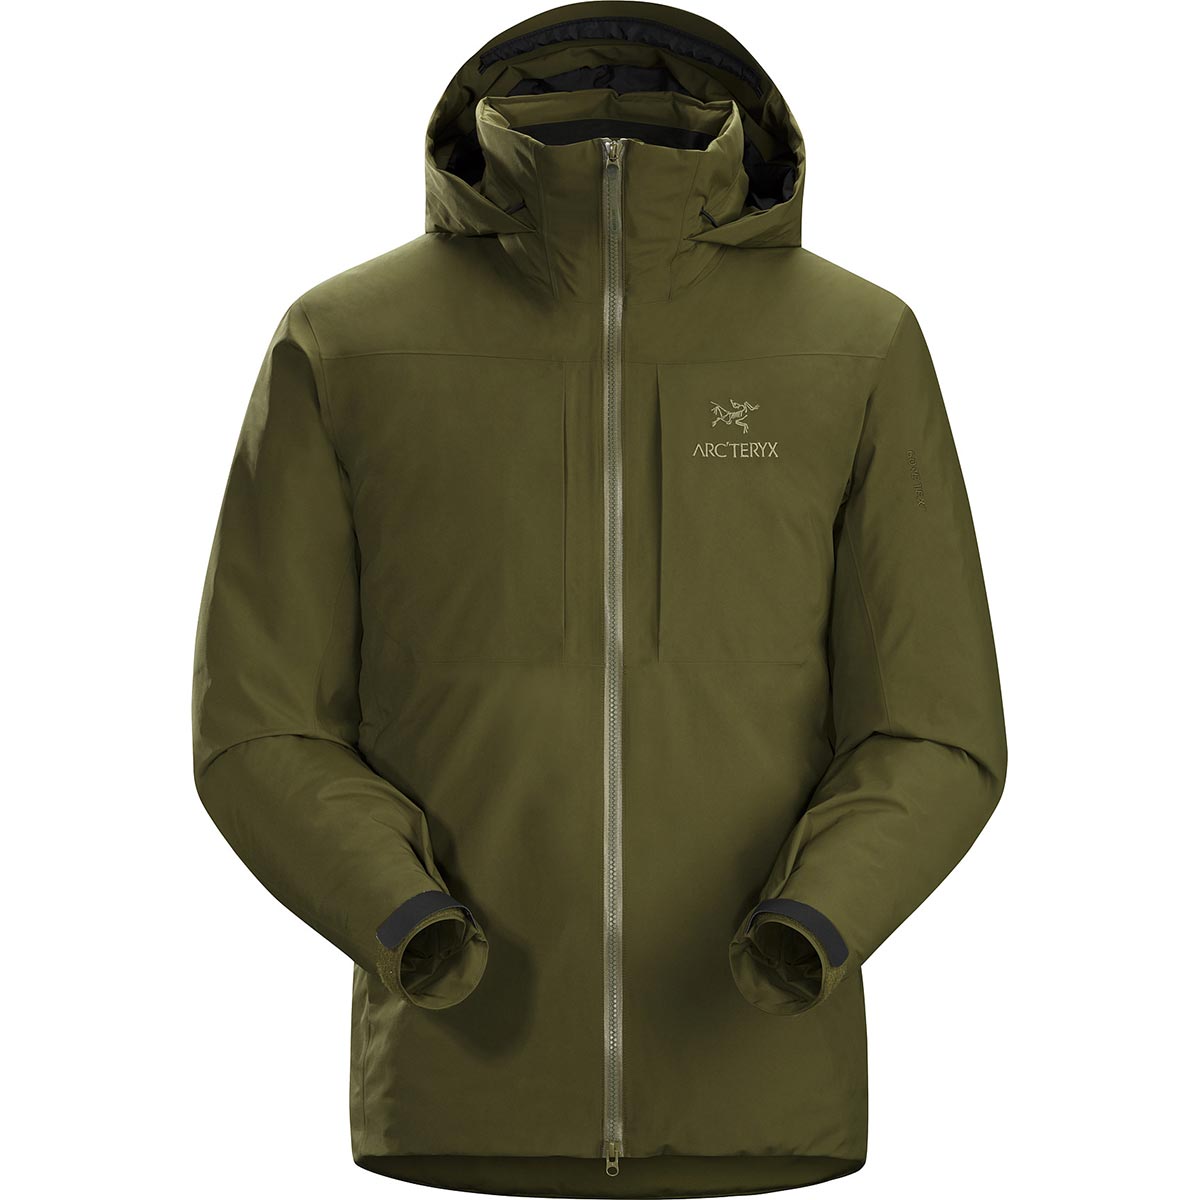 Arc'teryx Fission SV Jacket, men's, discontinued colors (free ground ...